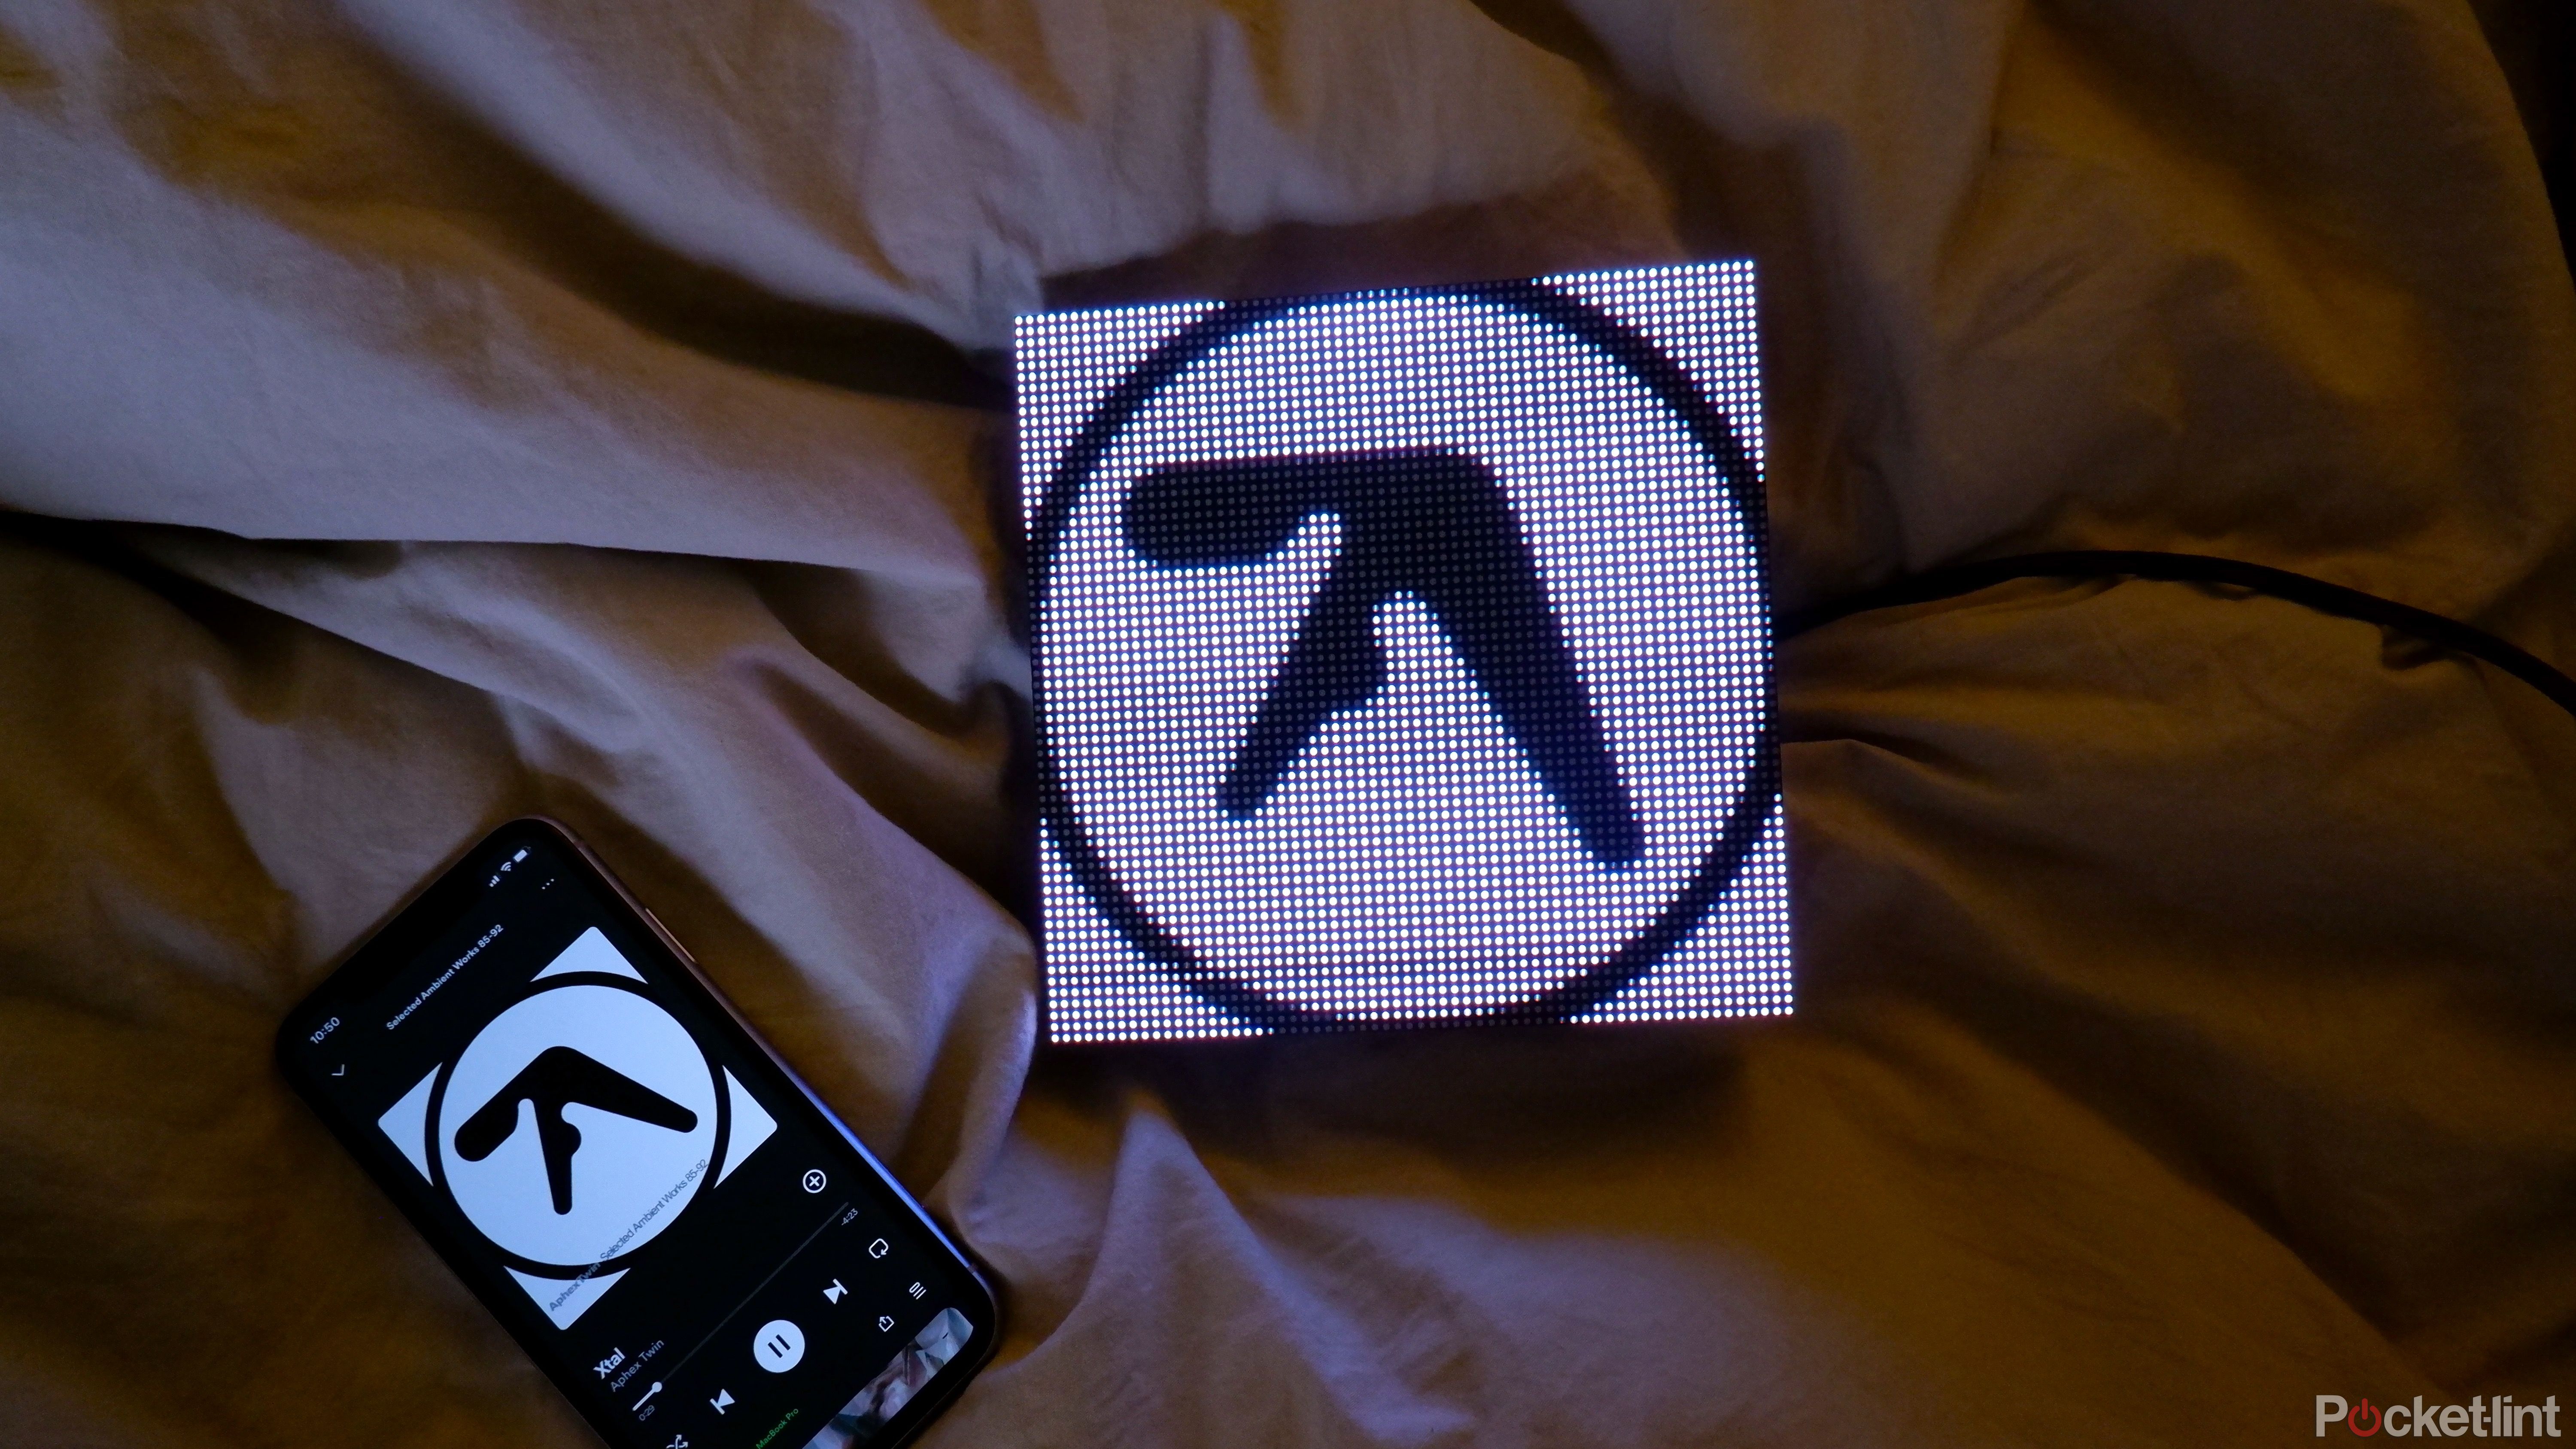 A Tuneshine on a bed showing album art for Aphex Twin, next to an iPhone with Spotify open.